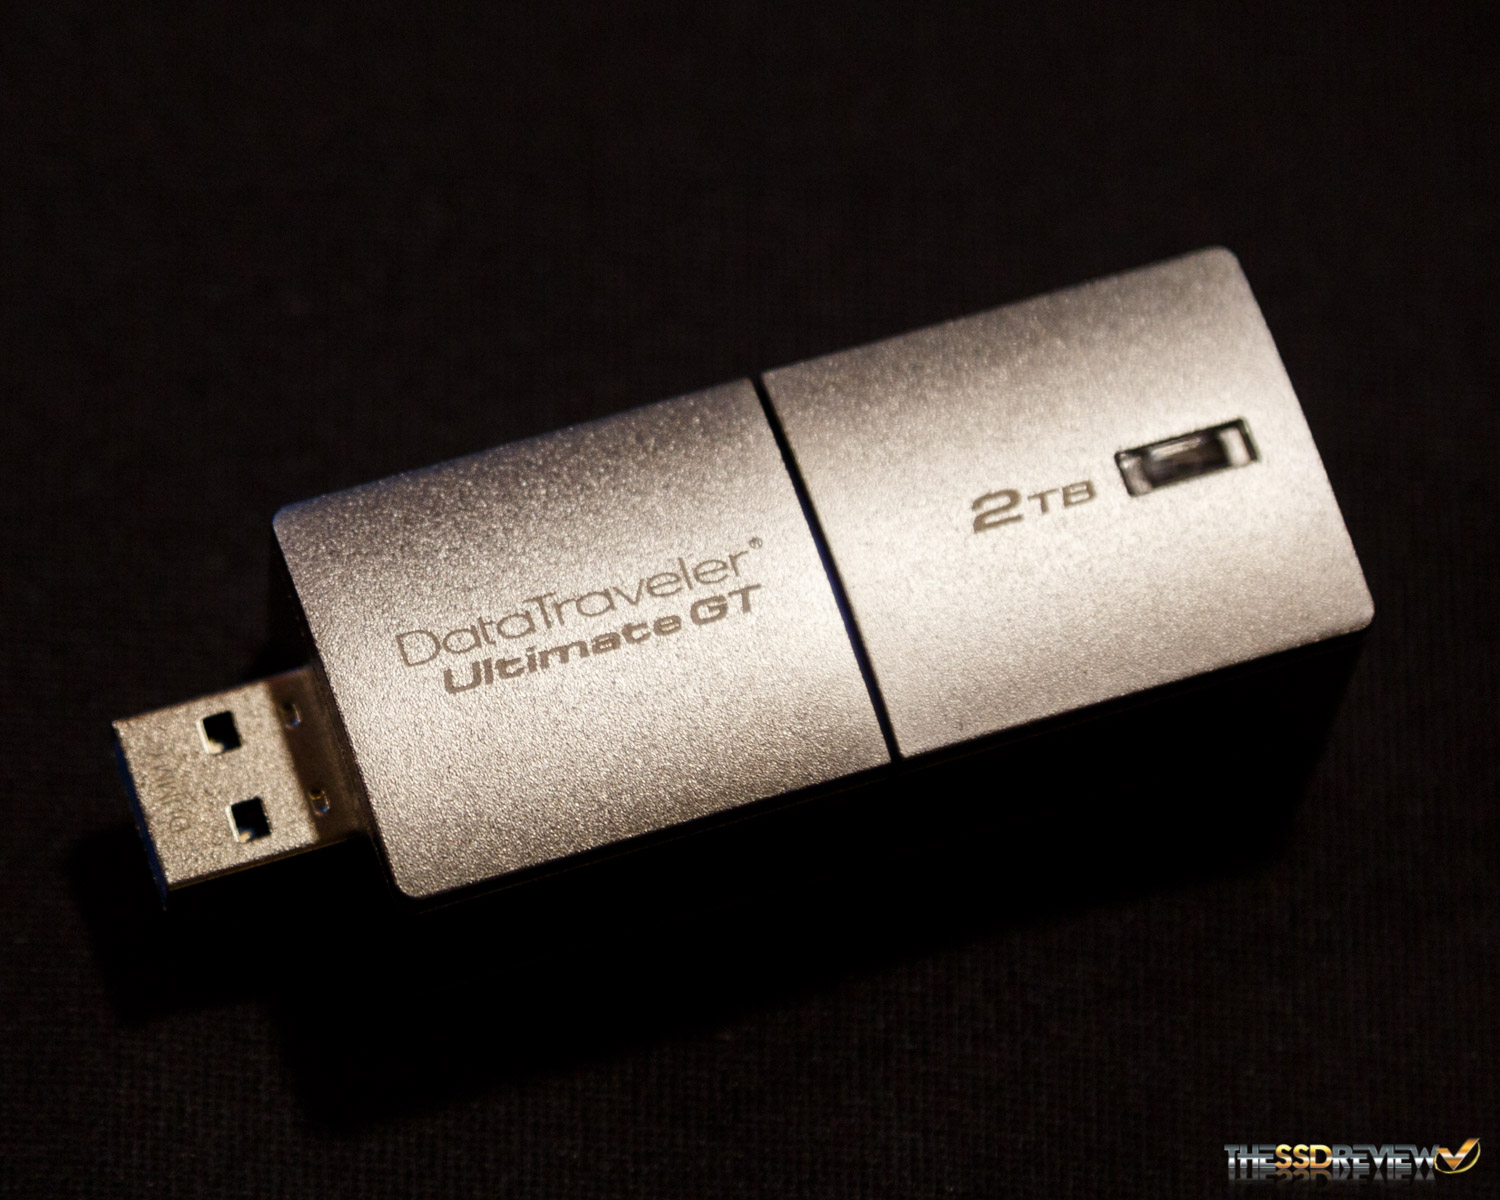 sommerfugl græs mens Kingston Reveals World's Largest Flash Drive and More - CES 2017 Update |  The SSD Review